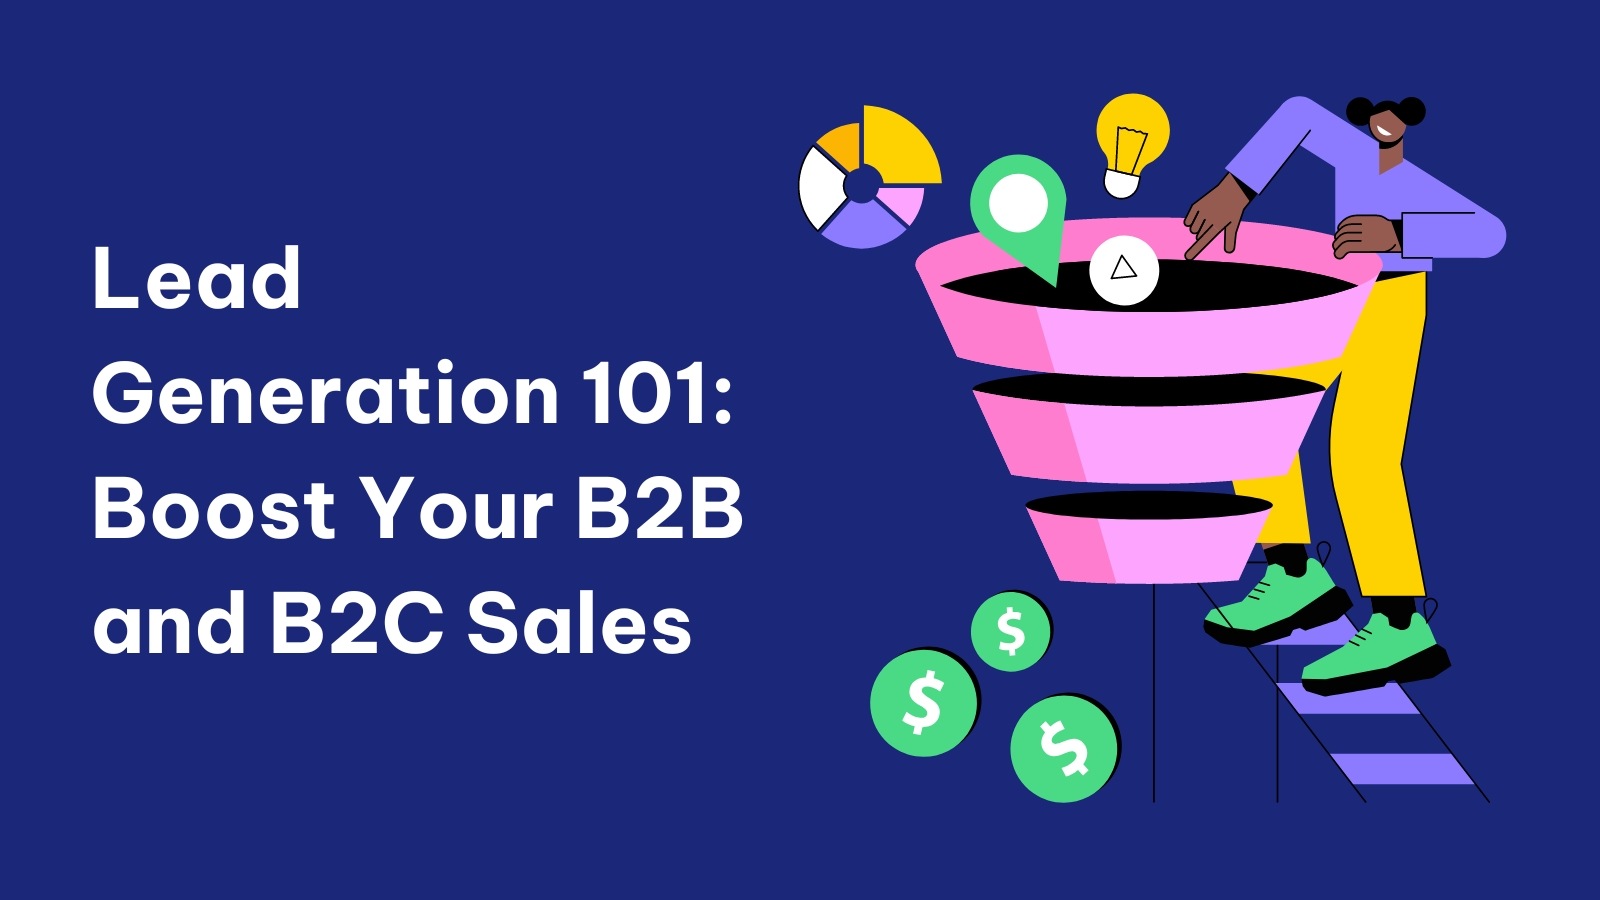 Lead Generation 101: Boost Your B2B and B2C Sales